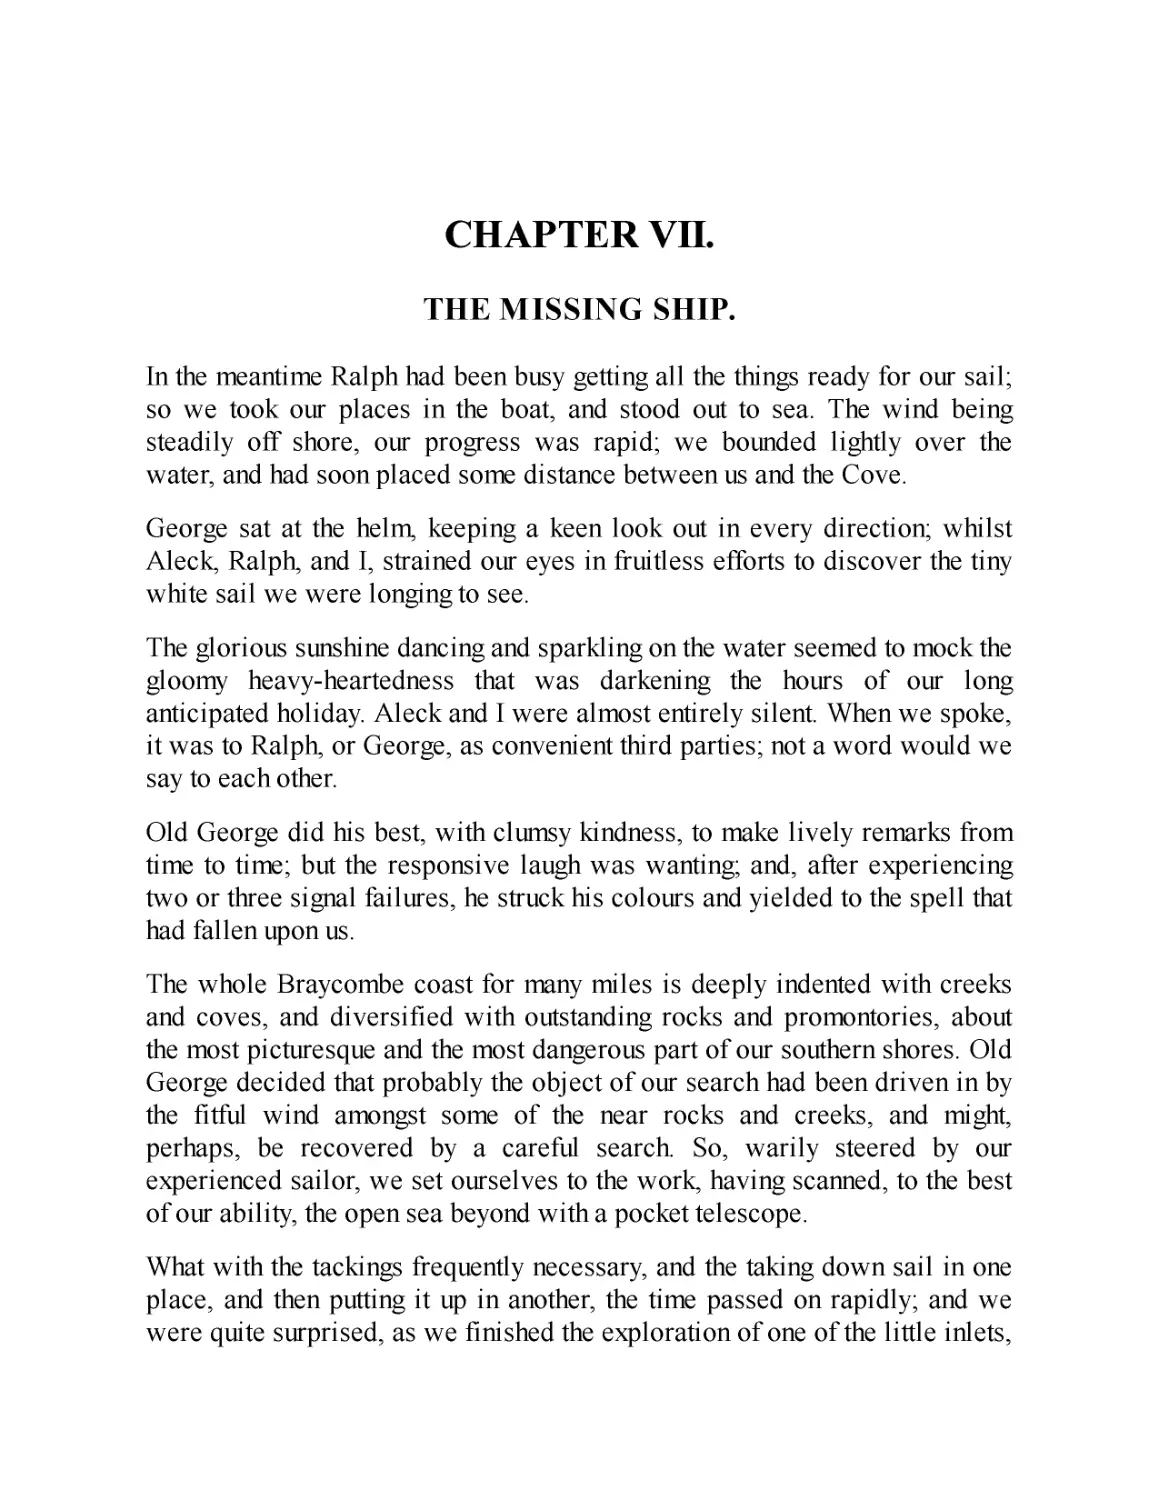 ﻿CHAPTER VII